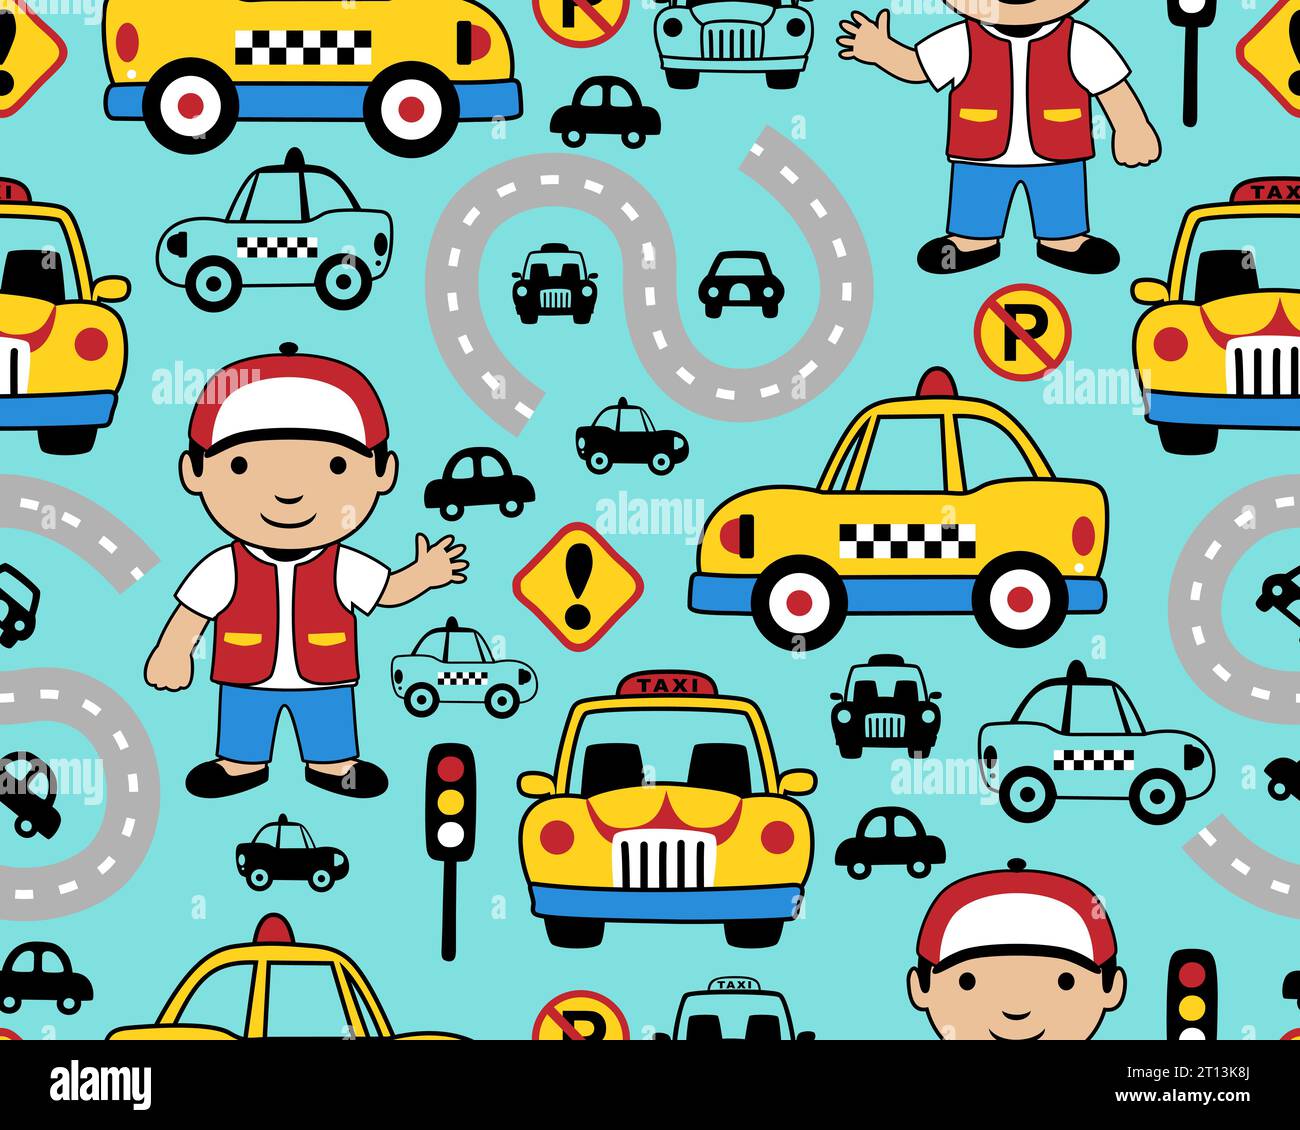 Seamless pattern vector of vehicles cartoon with funny taxi driver. Traffic elements cartoon Stock Vector